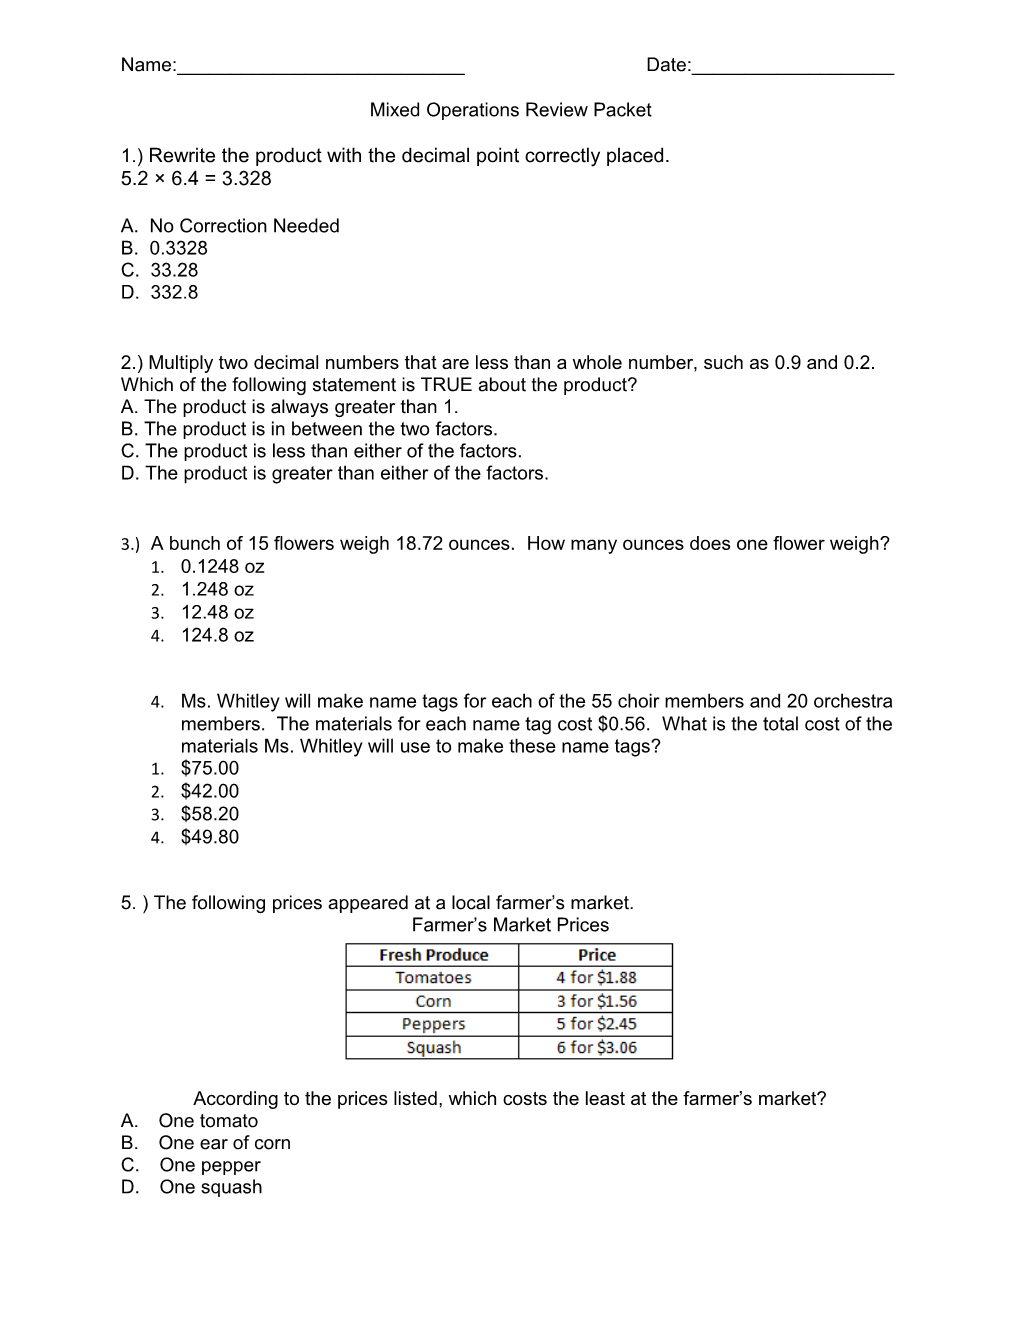 Mixed Operations Review Packet